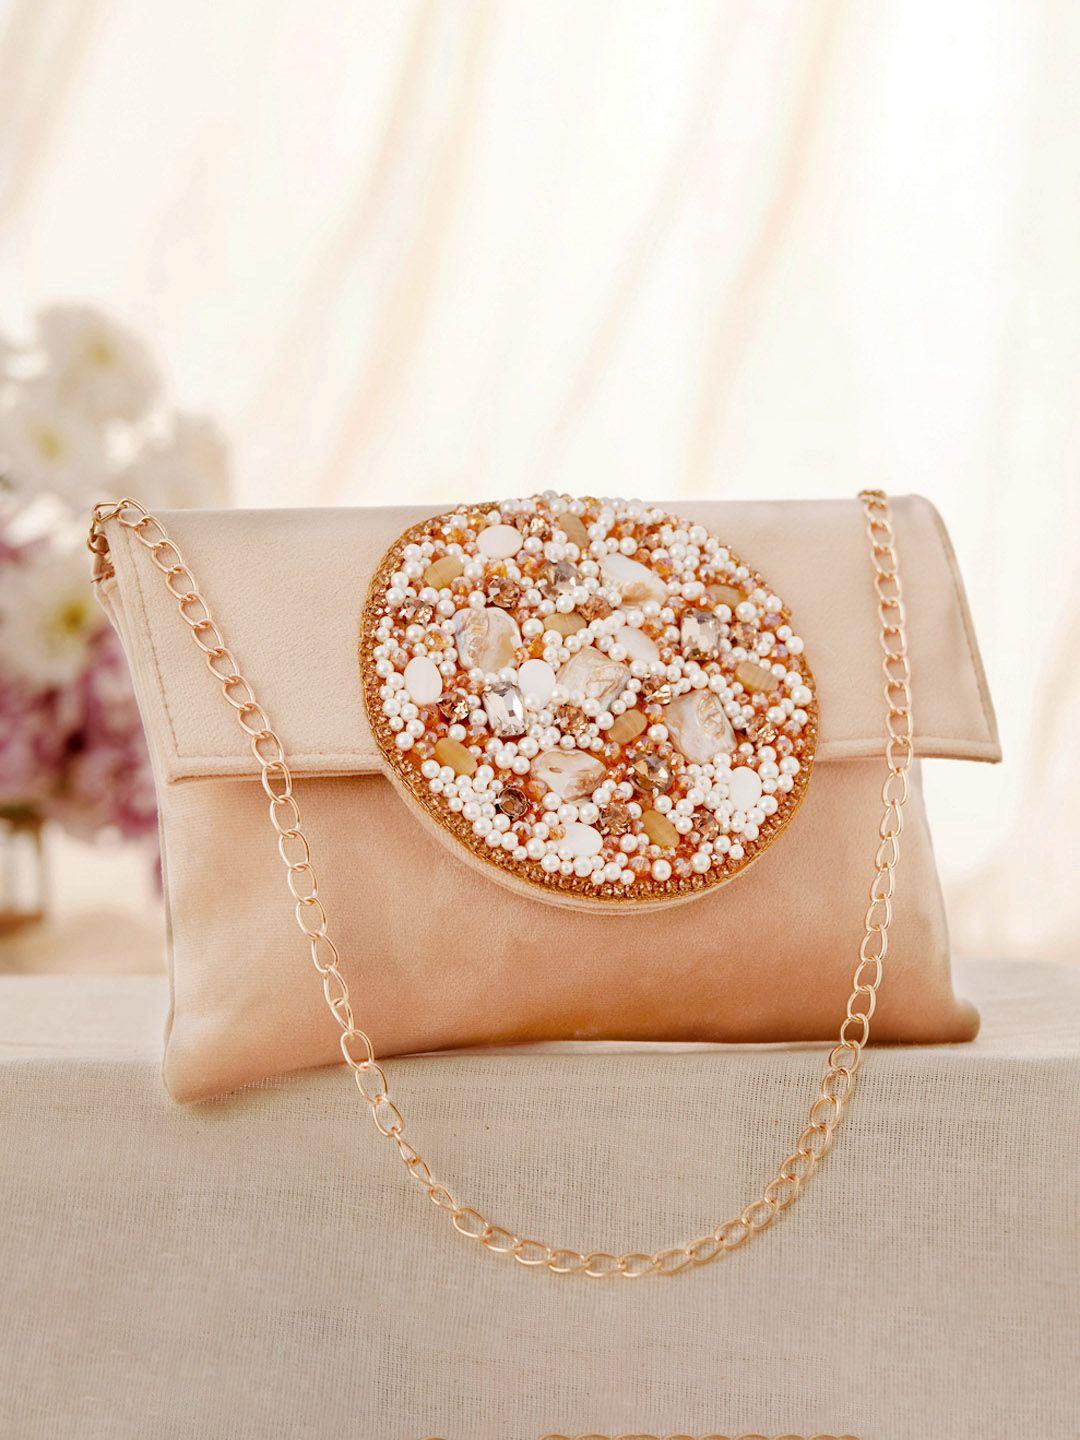 rubans off white & brown embellished embroidered purse clutch